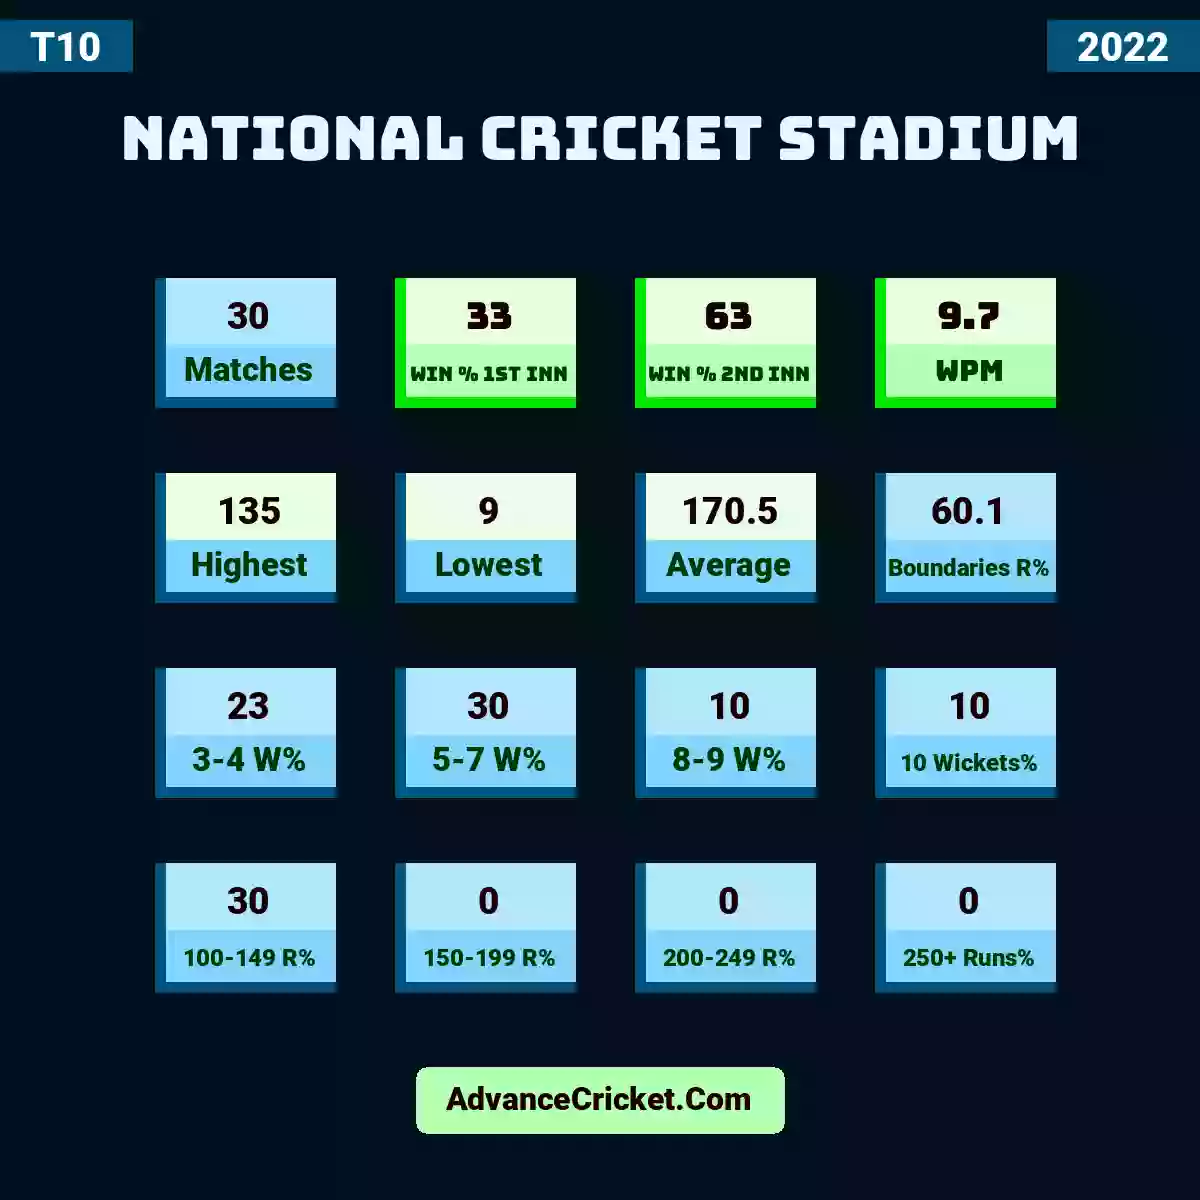 Image showing National Cricket Stadium with Matches: 30, Win % 1st Inn: 33, Win % 2nd Inn: 63, WPM: 9.7, Highest: 135, Lowest: 9, Average: 170.5, Boundaries R%: 60.1, 3-4 W%: 23, 5-7 W%: 30, 8-9 W%: 10, 10 Wickets%: 10, 100-149 R%: 30, 150-199 R%: 0, 200-249 R%: 0, 250+ Runs%: 0.